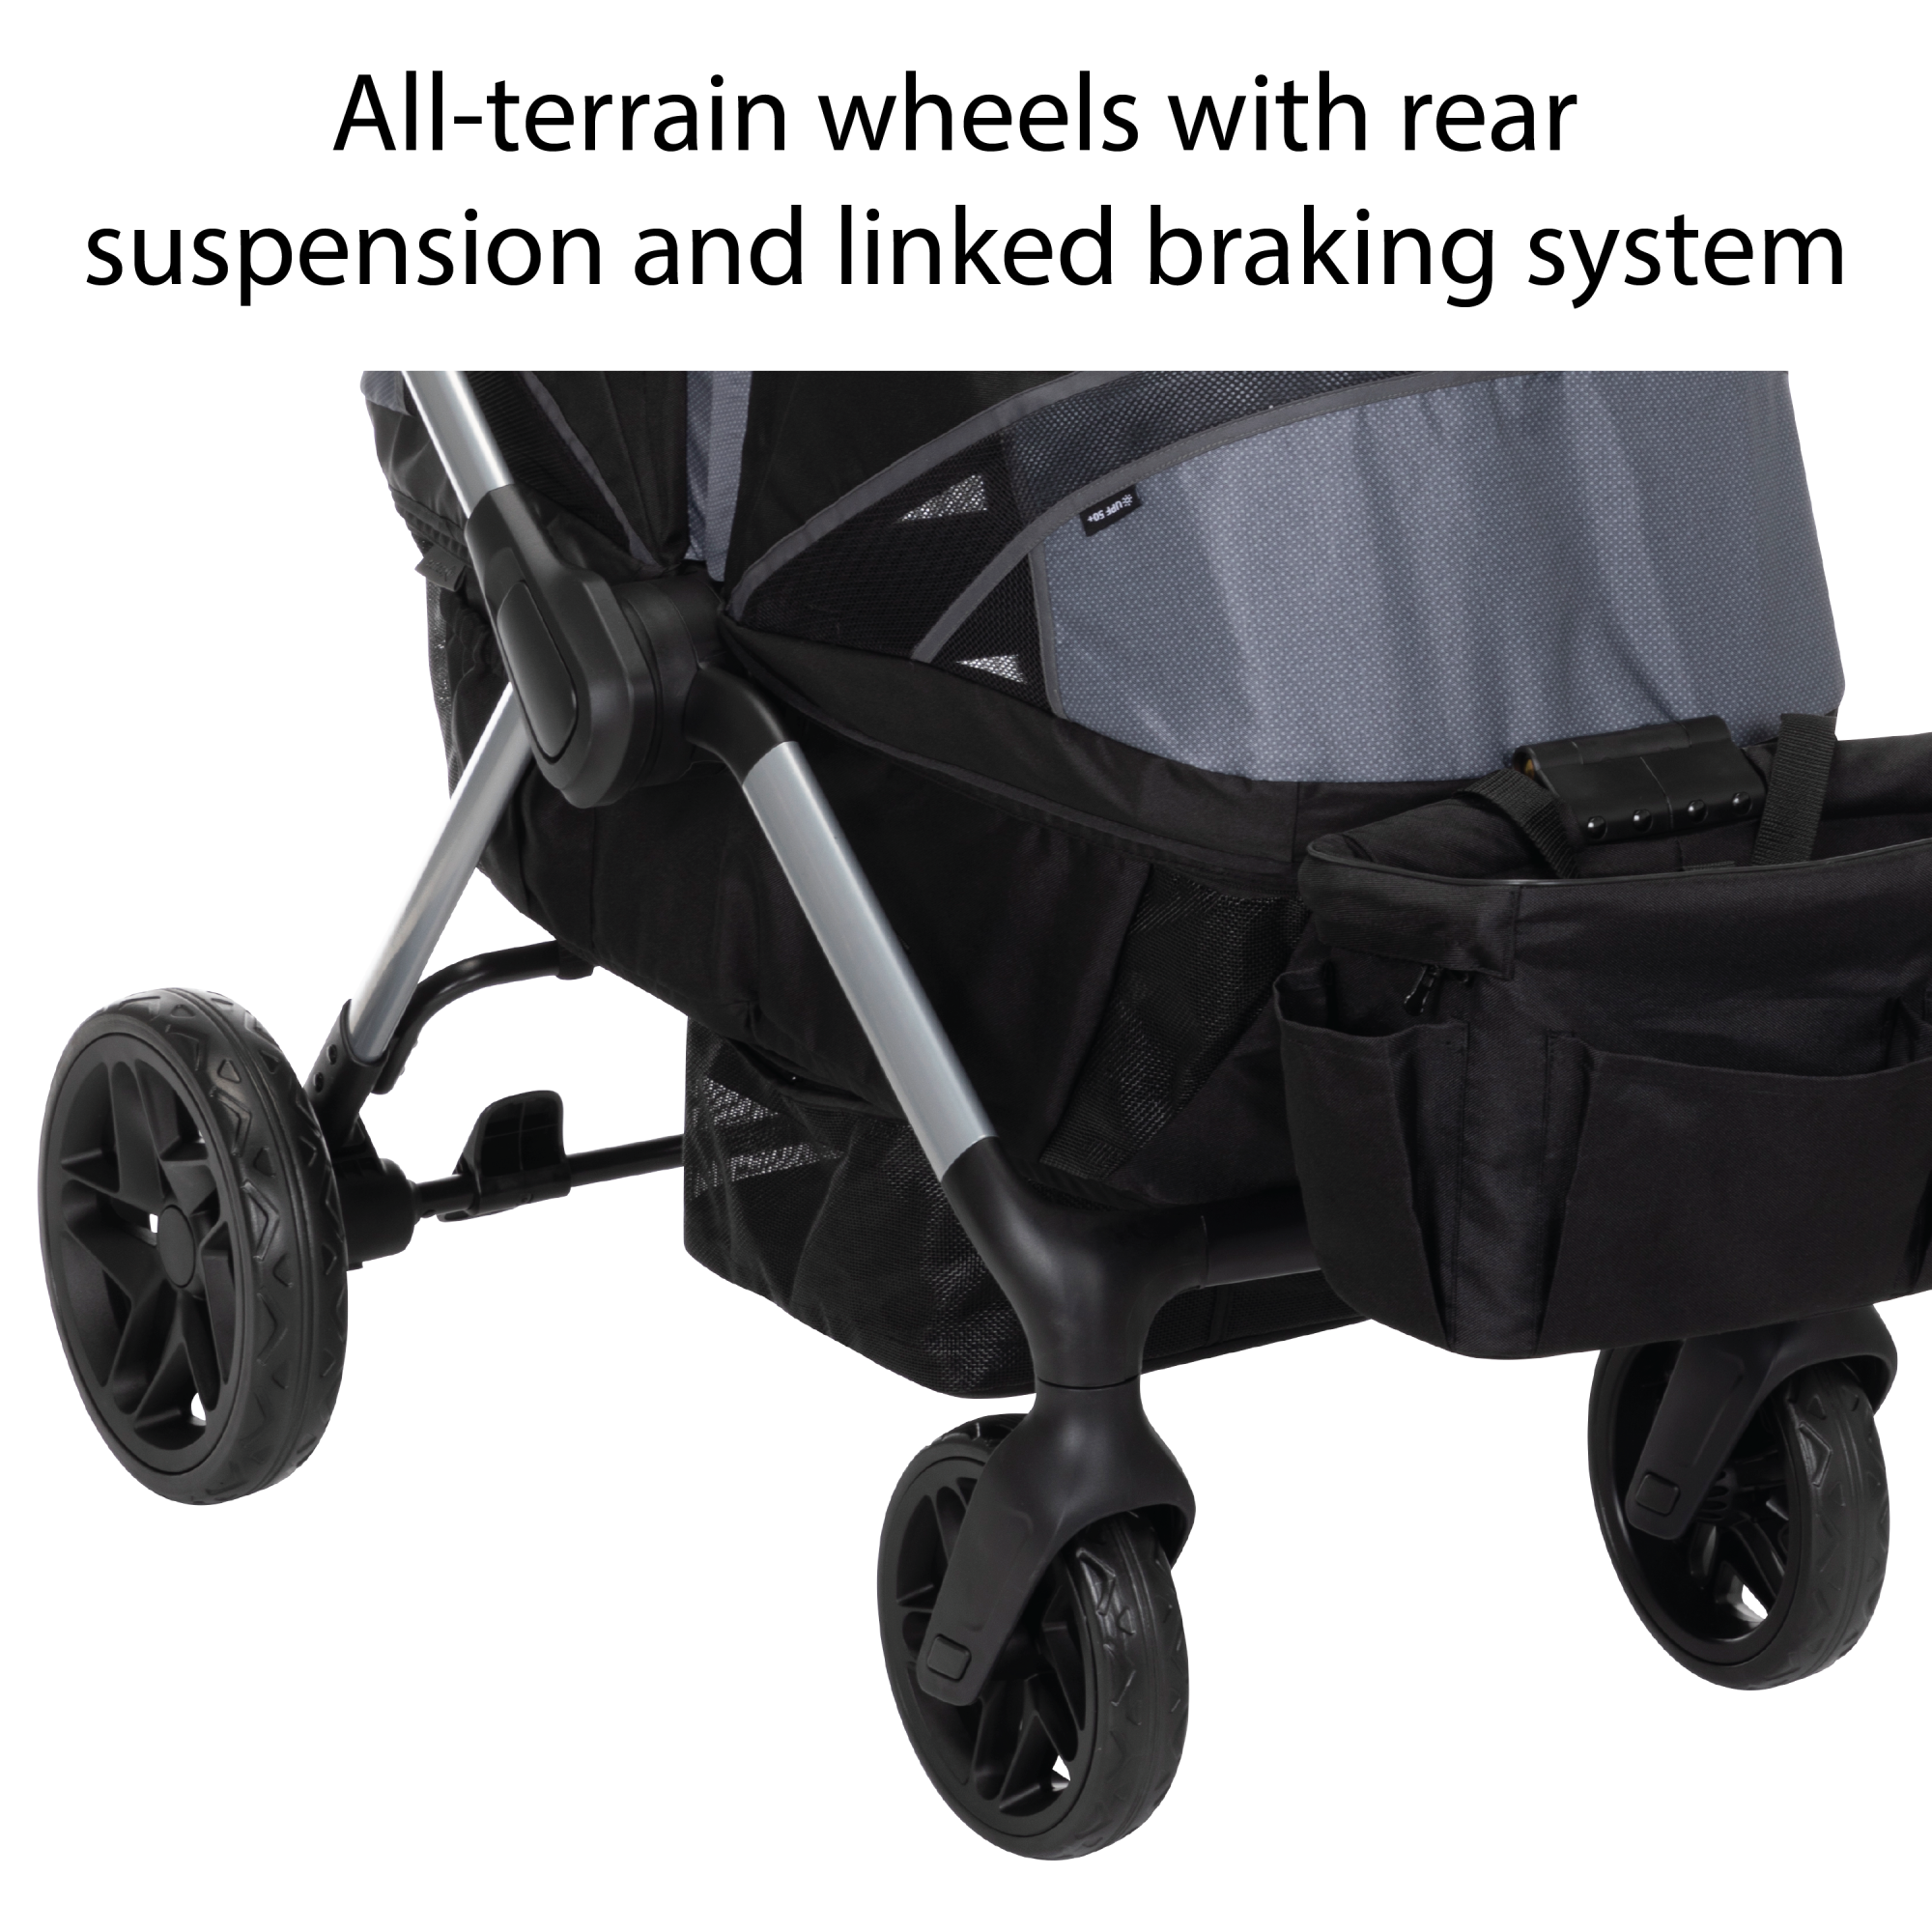 Summit Wagon Stroller - all-terrain wheels with rear suspension and linked braking system